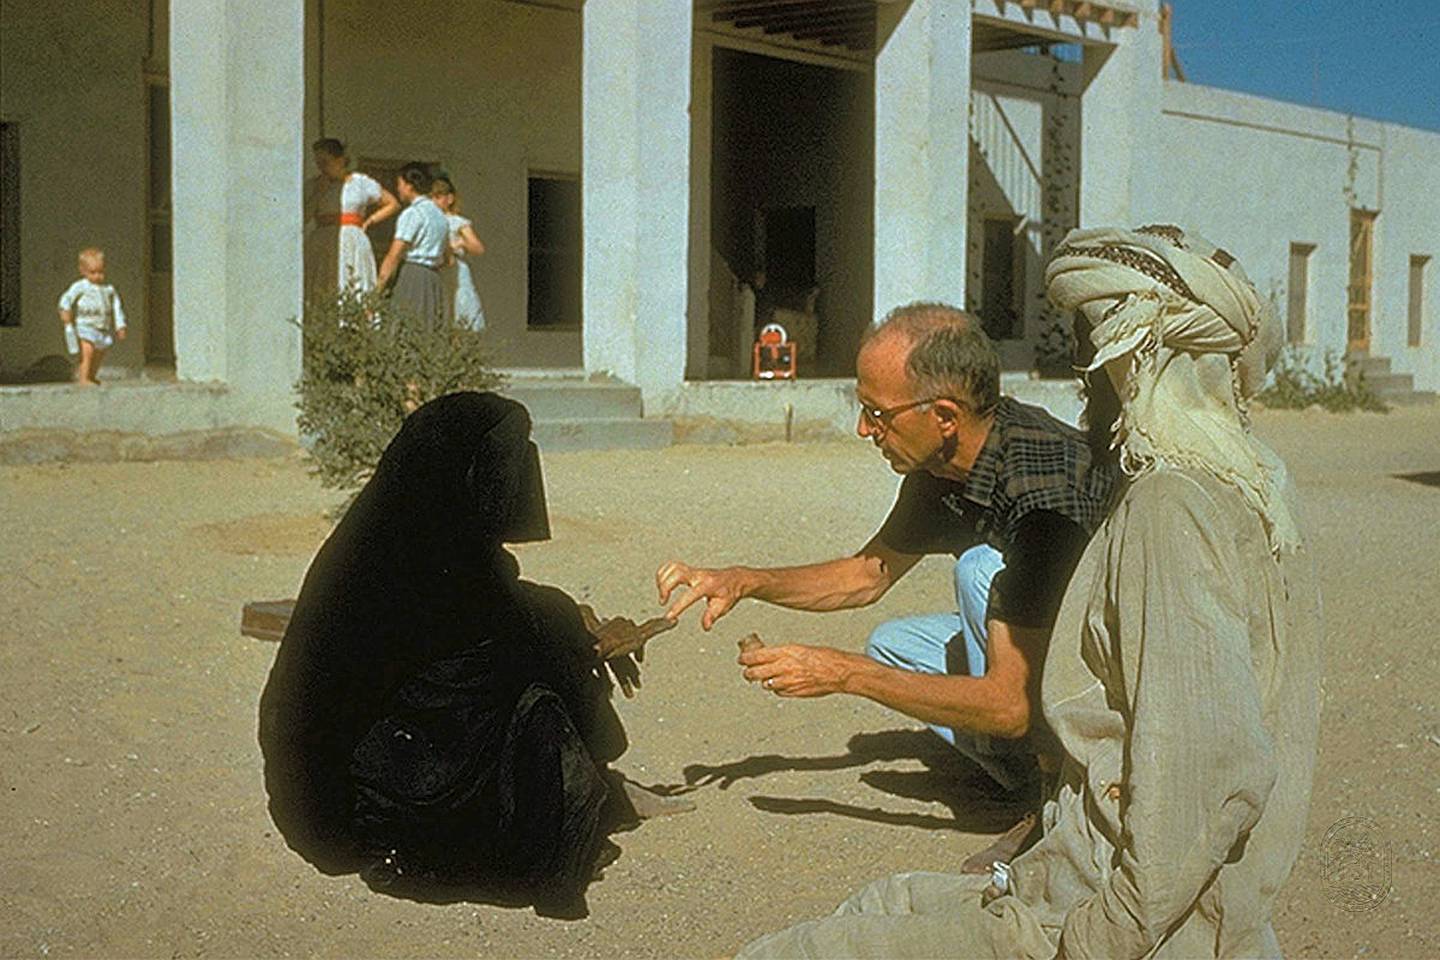 Dr Pat Kennedy treating a woman at the original hospital compound, circa 1961. This handout photograph is an archival image of the Oasis hospital Al Ain in the 1960s. Courtesy of Brooks Glett/Oasis Hospital